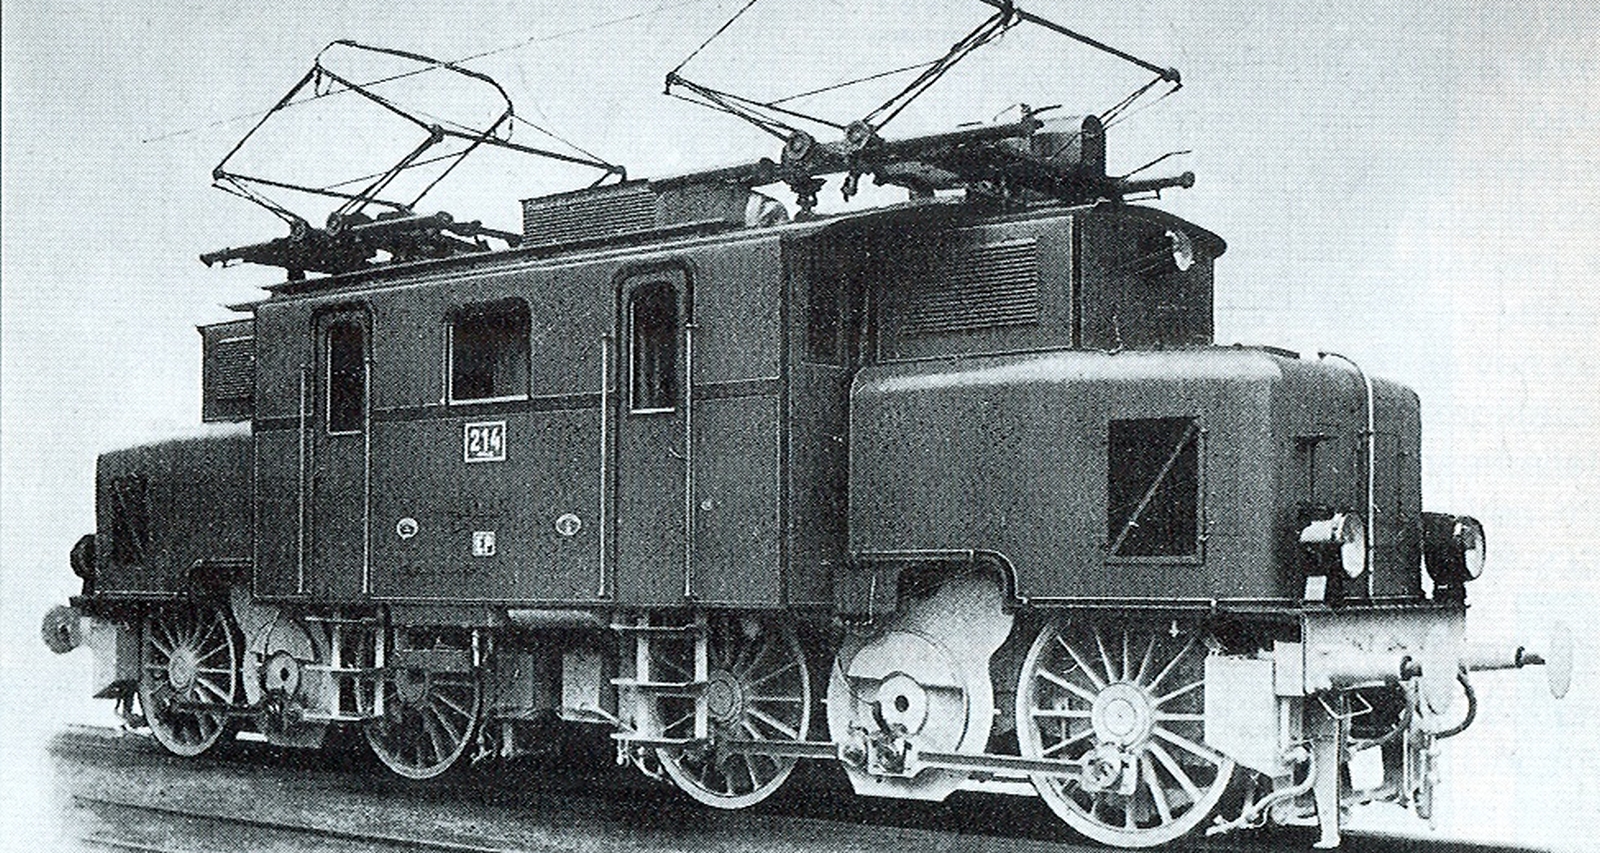 EP 214 on a BMAG works photo